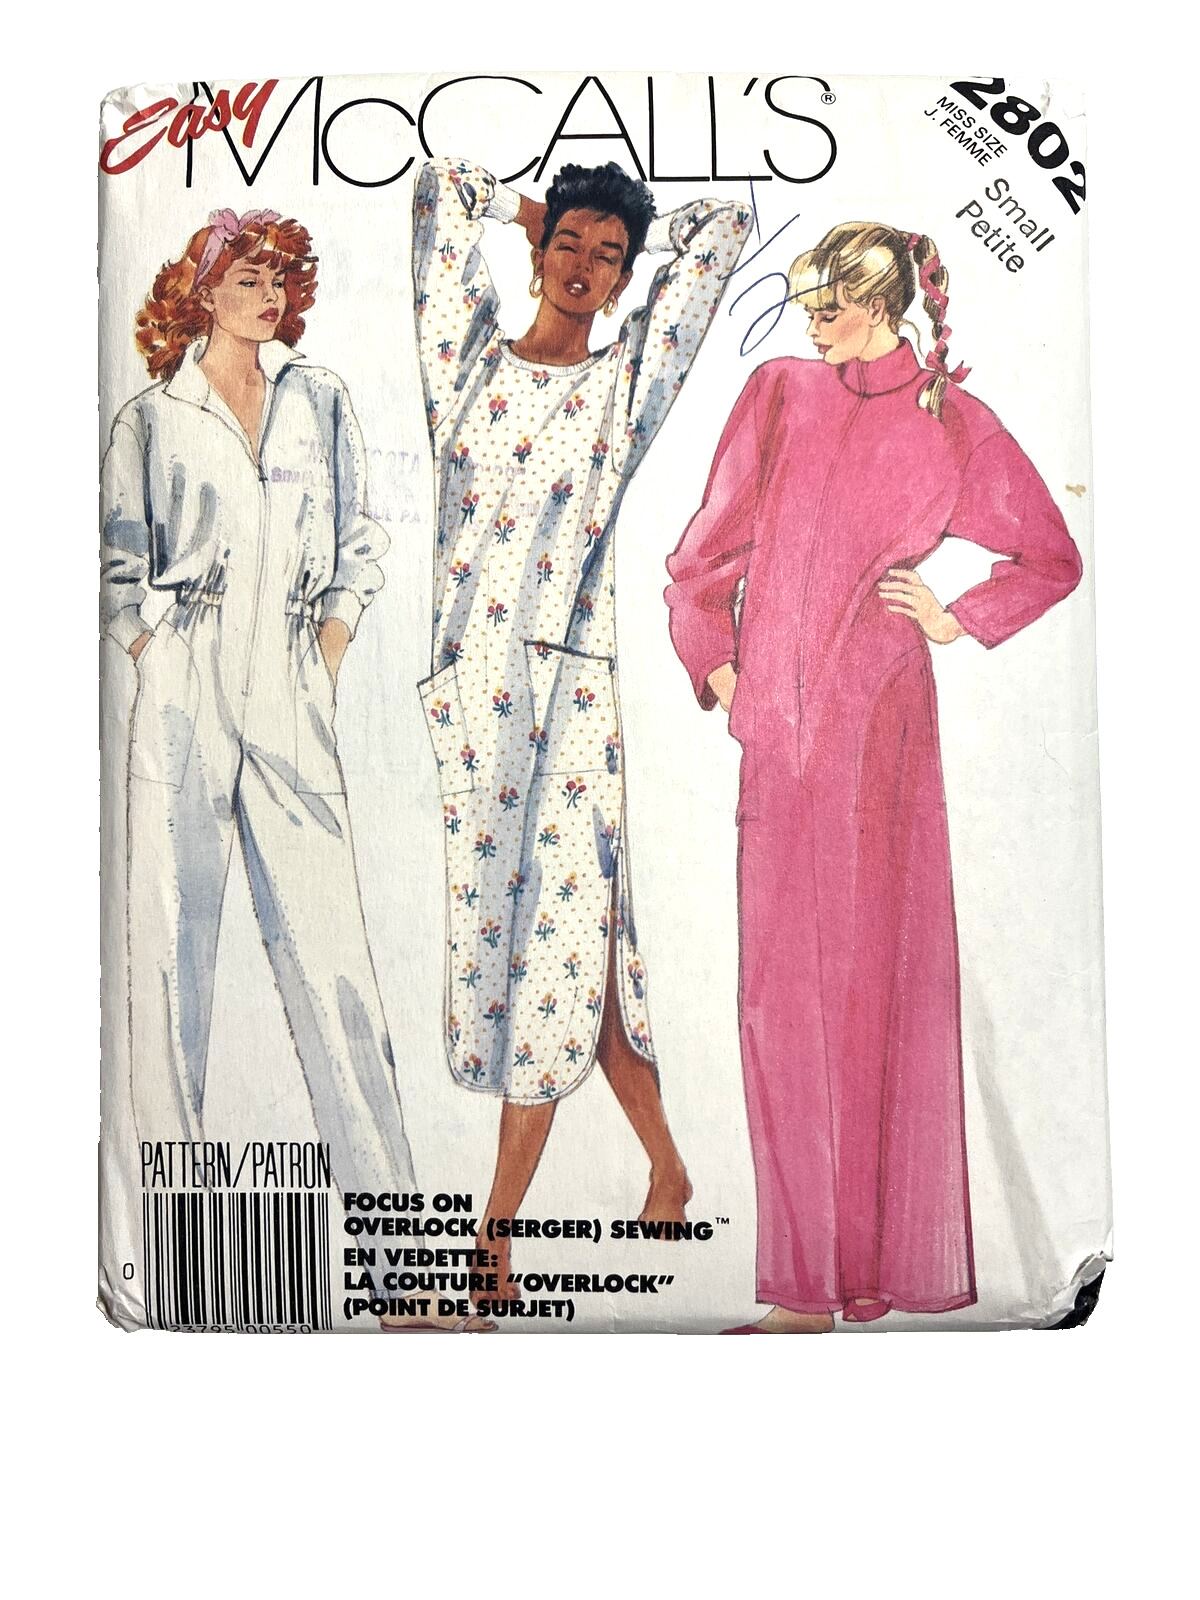 McCalls 2802 Jumpsuit Pullover Robe Nightgown Size Small Bust 32.5 - 34 UNCUT